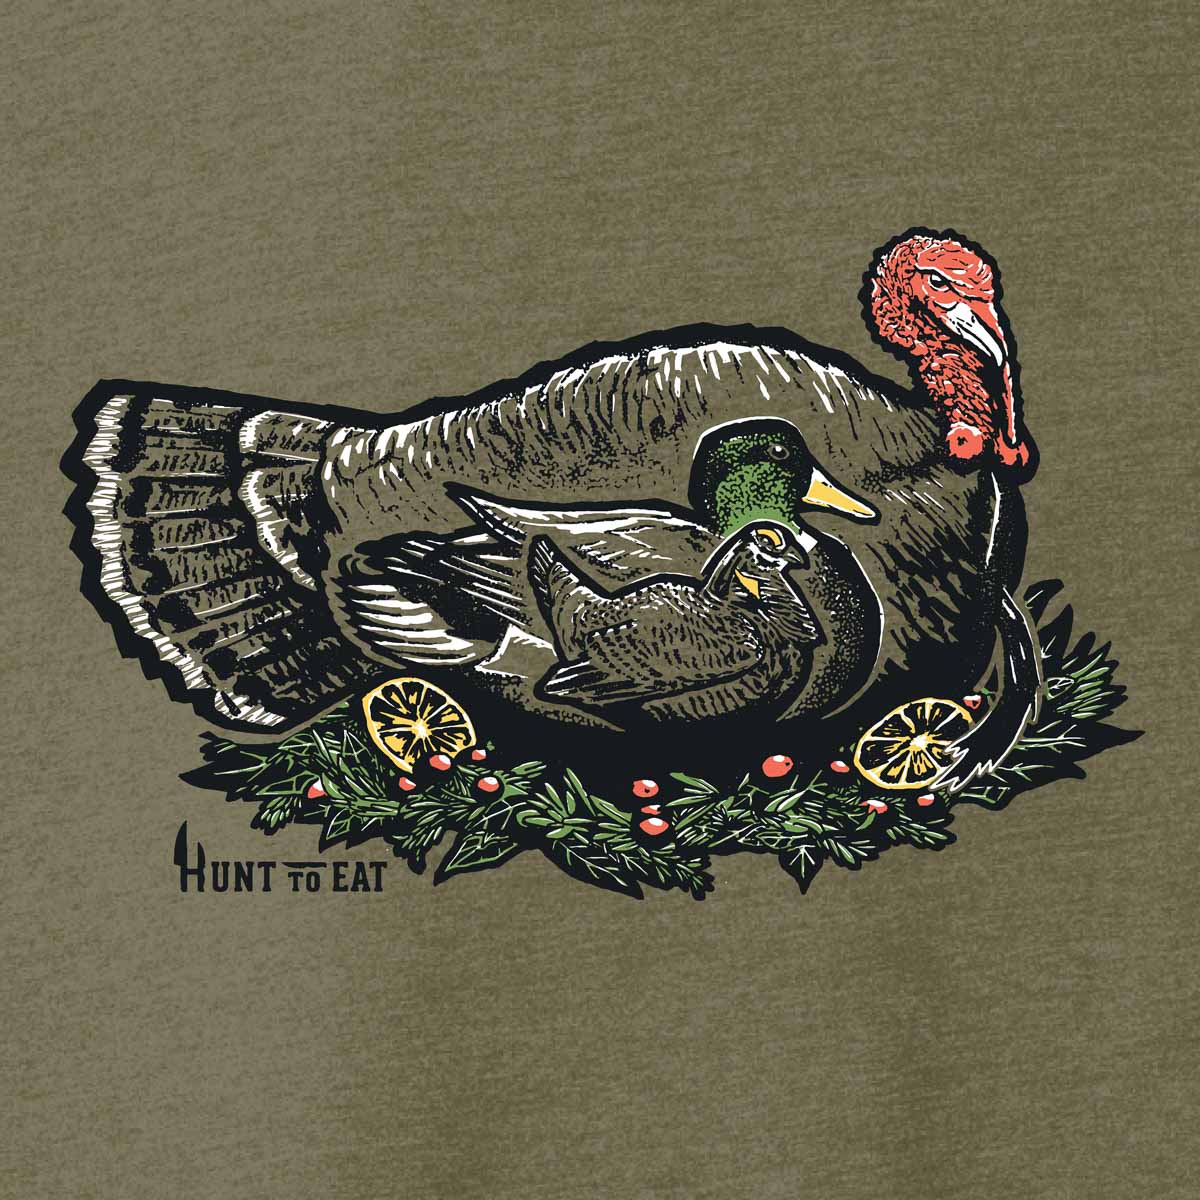 Turducken T-Shirt by Hunt To Eat. Olive Green T-Shirt decorated with an illustration of a wild Prarie Chicken inside a Mallard Duck inside a Wild Turkey